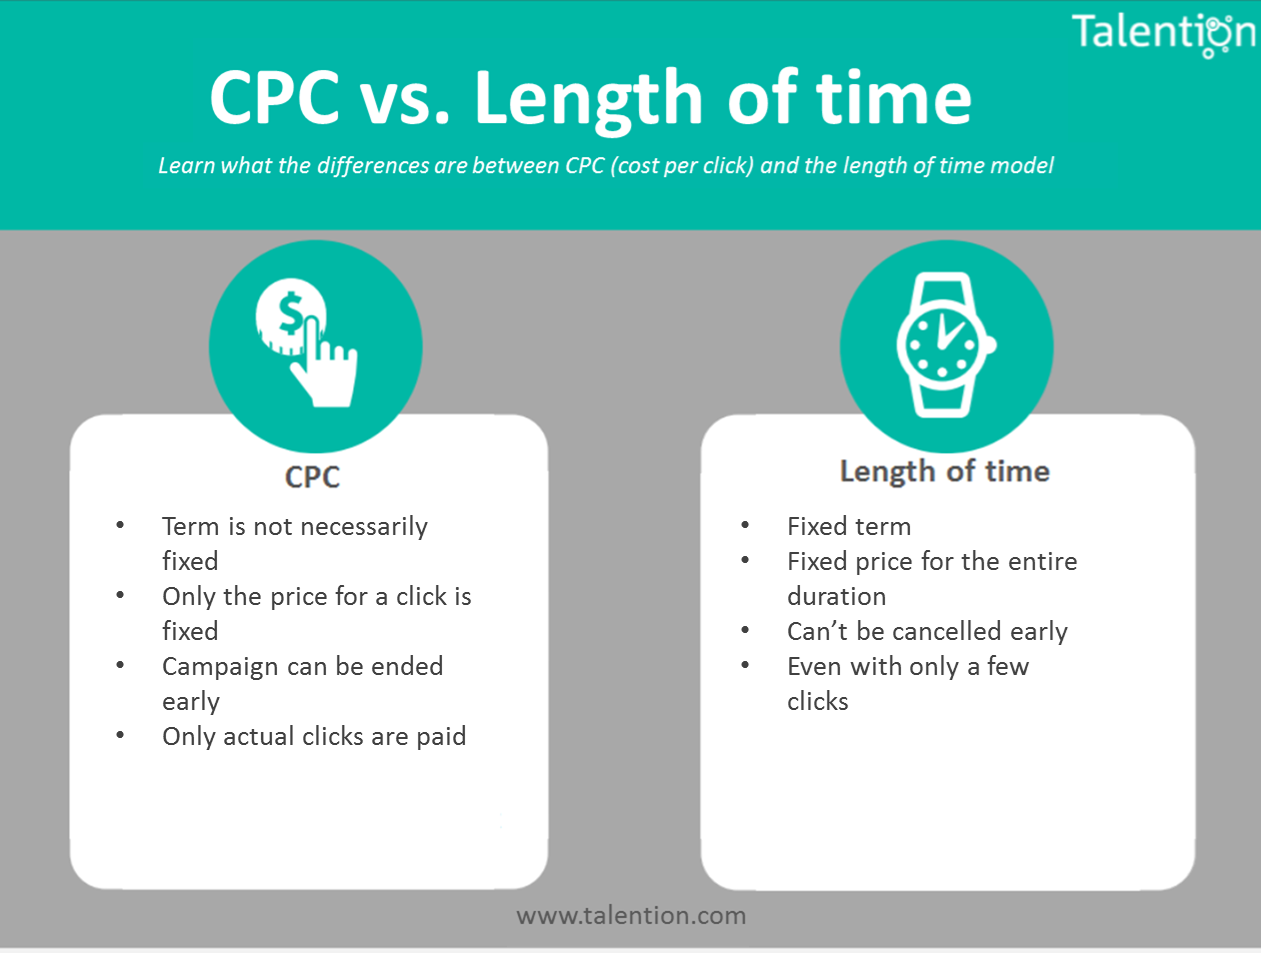 How to Get More Applications: Length of Time Model vs. CPC Model